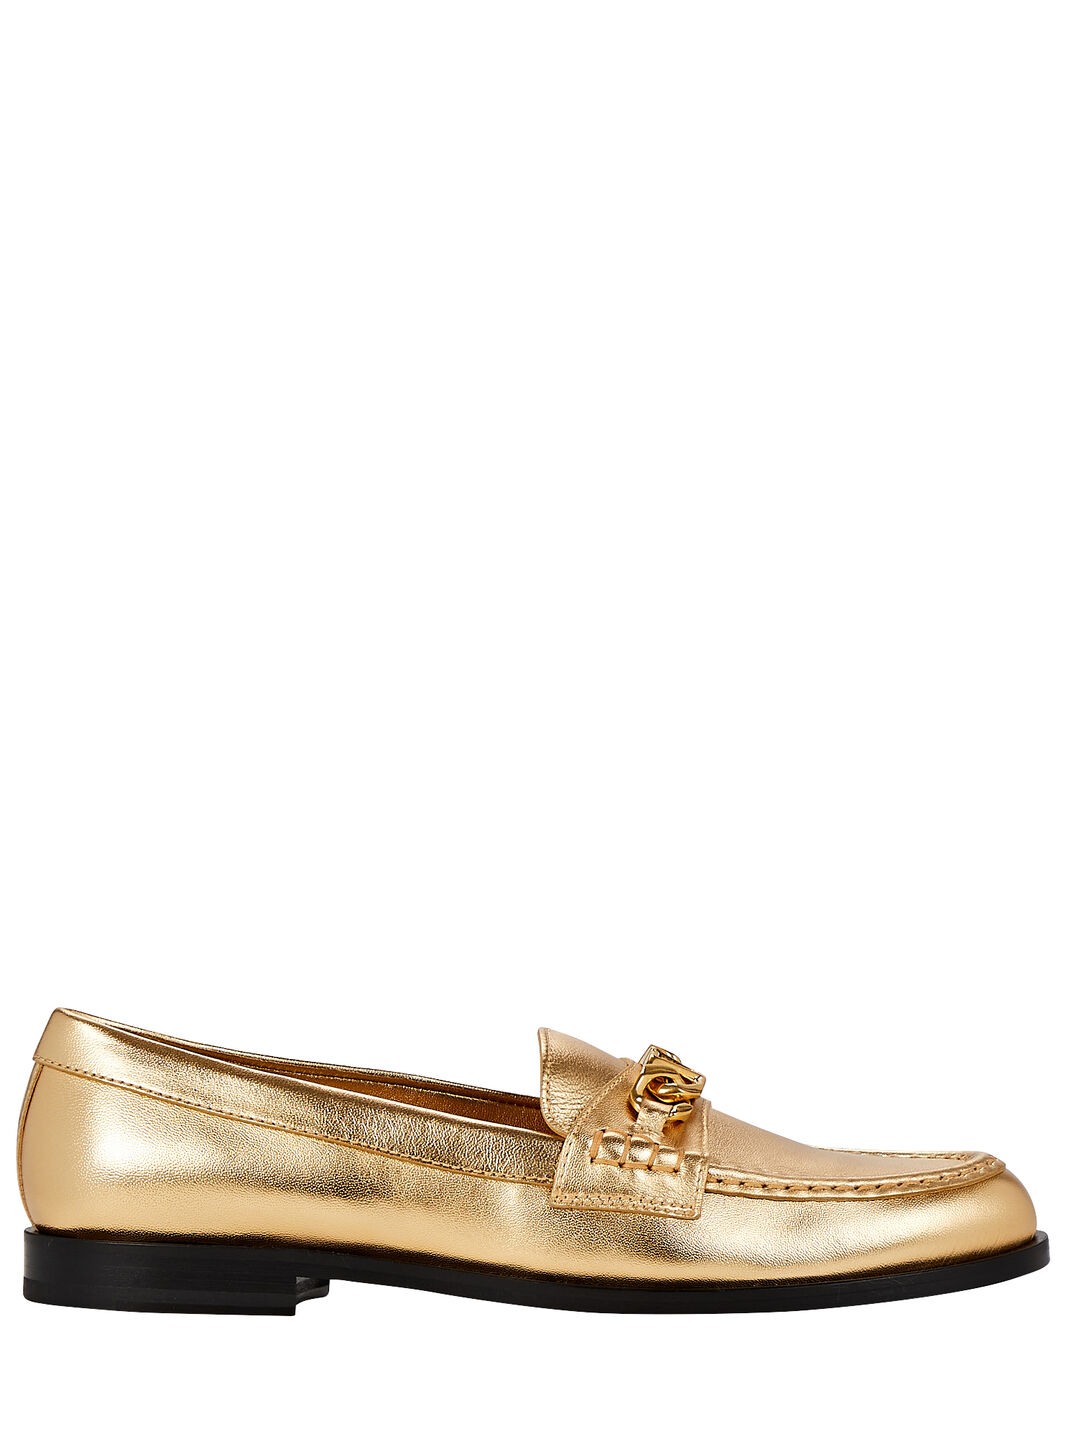 Vlogo Chain Metallic Leather Loafers